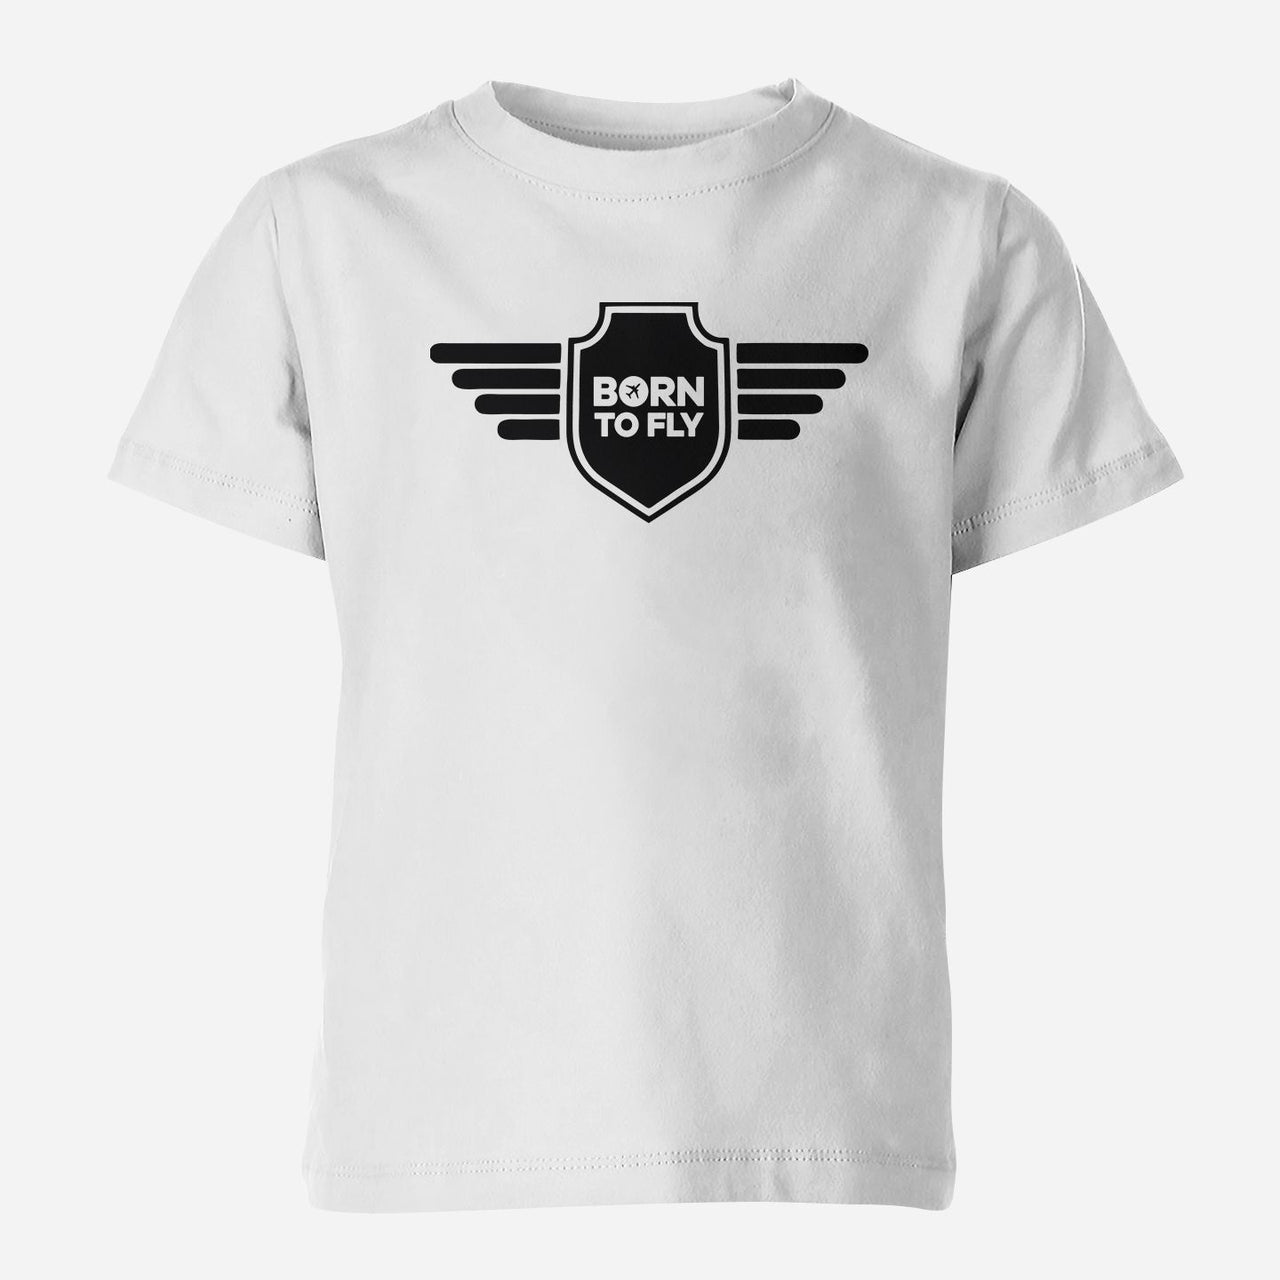 Born To Fly & Badge Designed Children T-Shirts